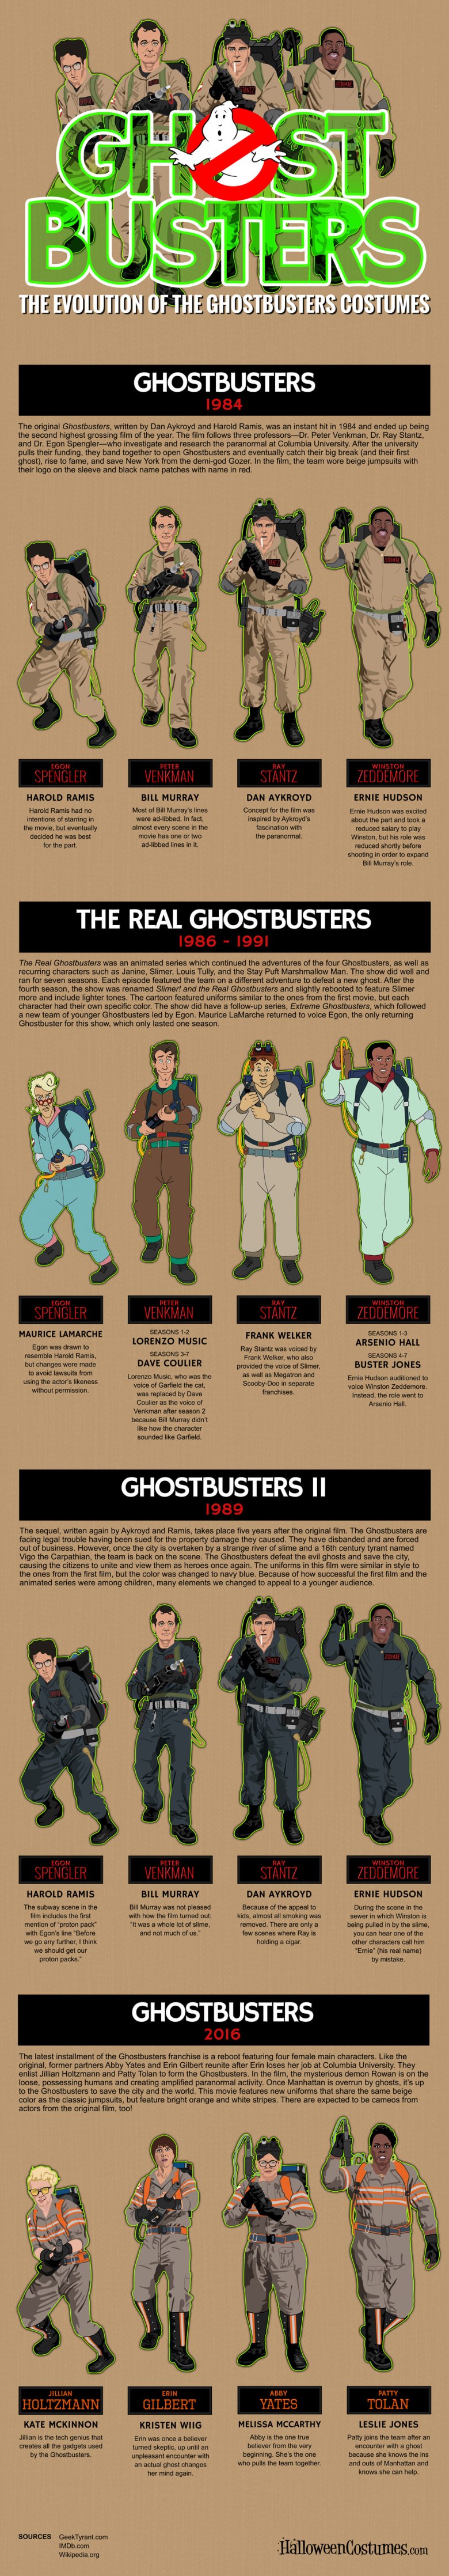 Ghostbusters-Costume-Evolution-Infographic